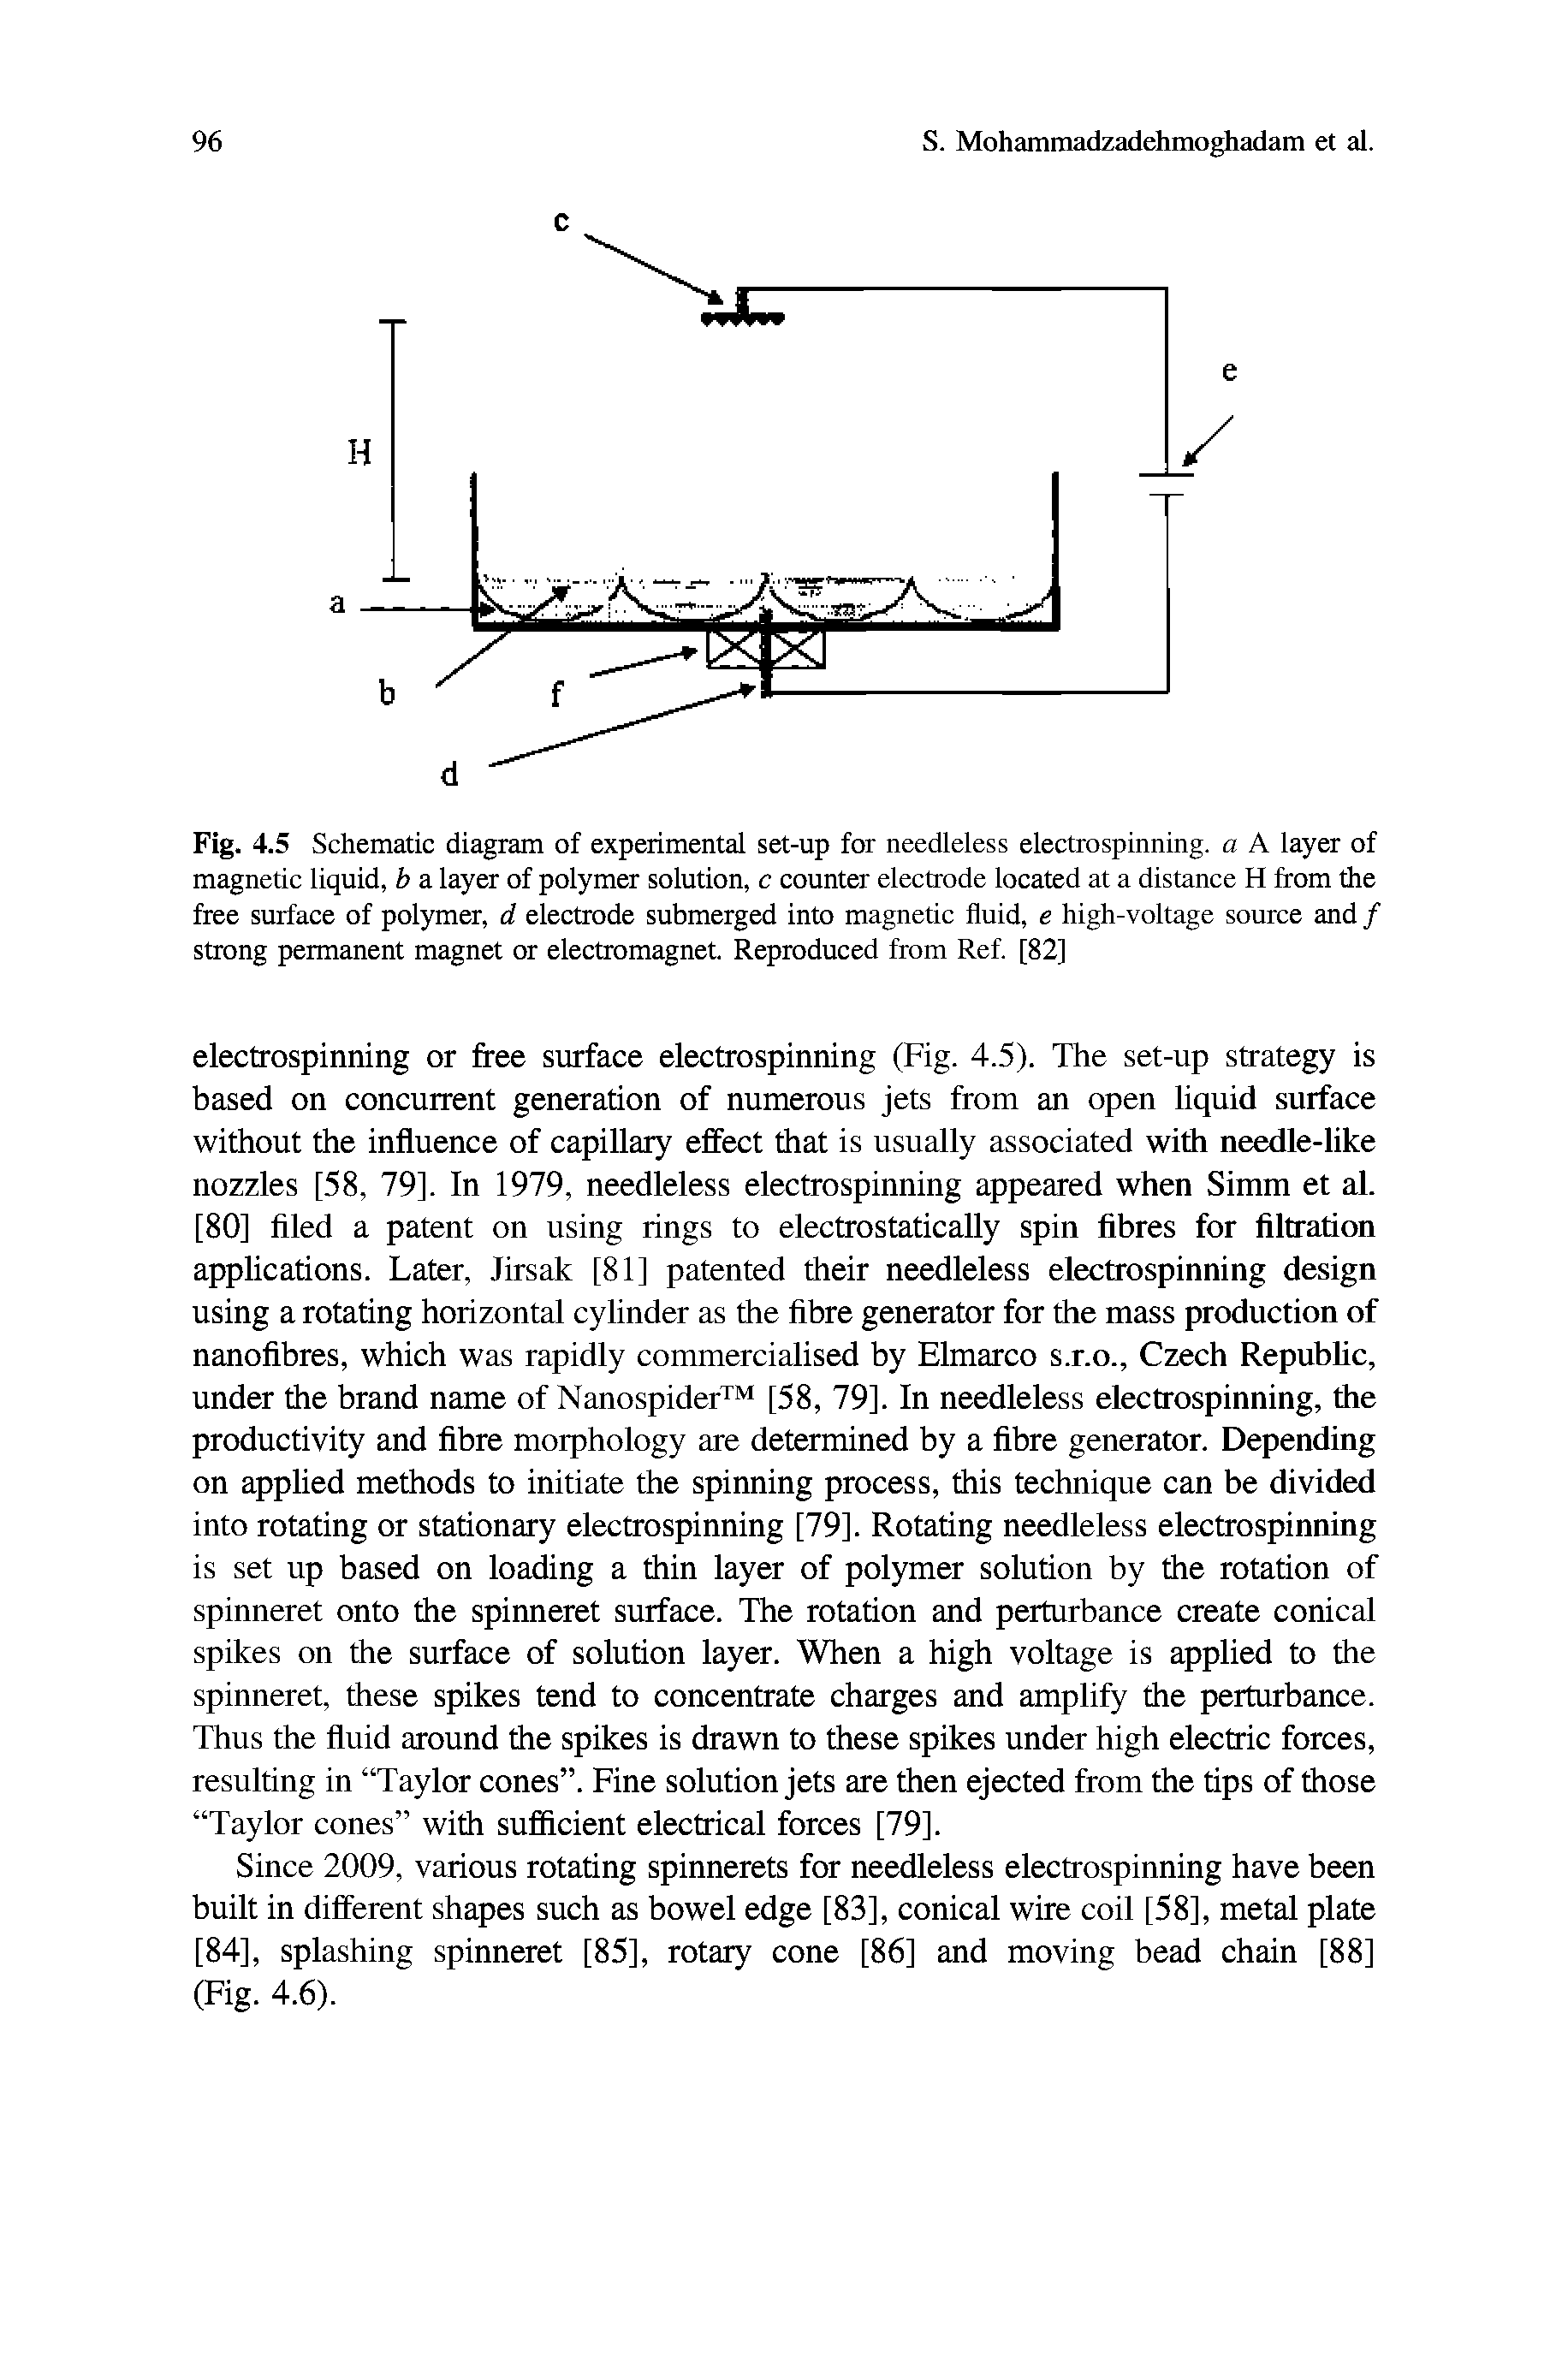 Fig. 4.5 Schematic diagram of experimental set-up for needleless electrospinning, a A layer of magnetic liquid, b a layer of polymer solution, c counter electrode loeated at a distance H from the ee surface of pol3nner, d electrode submerged into magnetic fluid, e high-voltage source and / strong permanent magnet or electromagnet Reproduced from Ref. [82]...